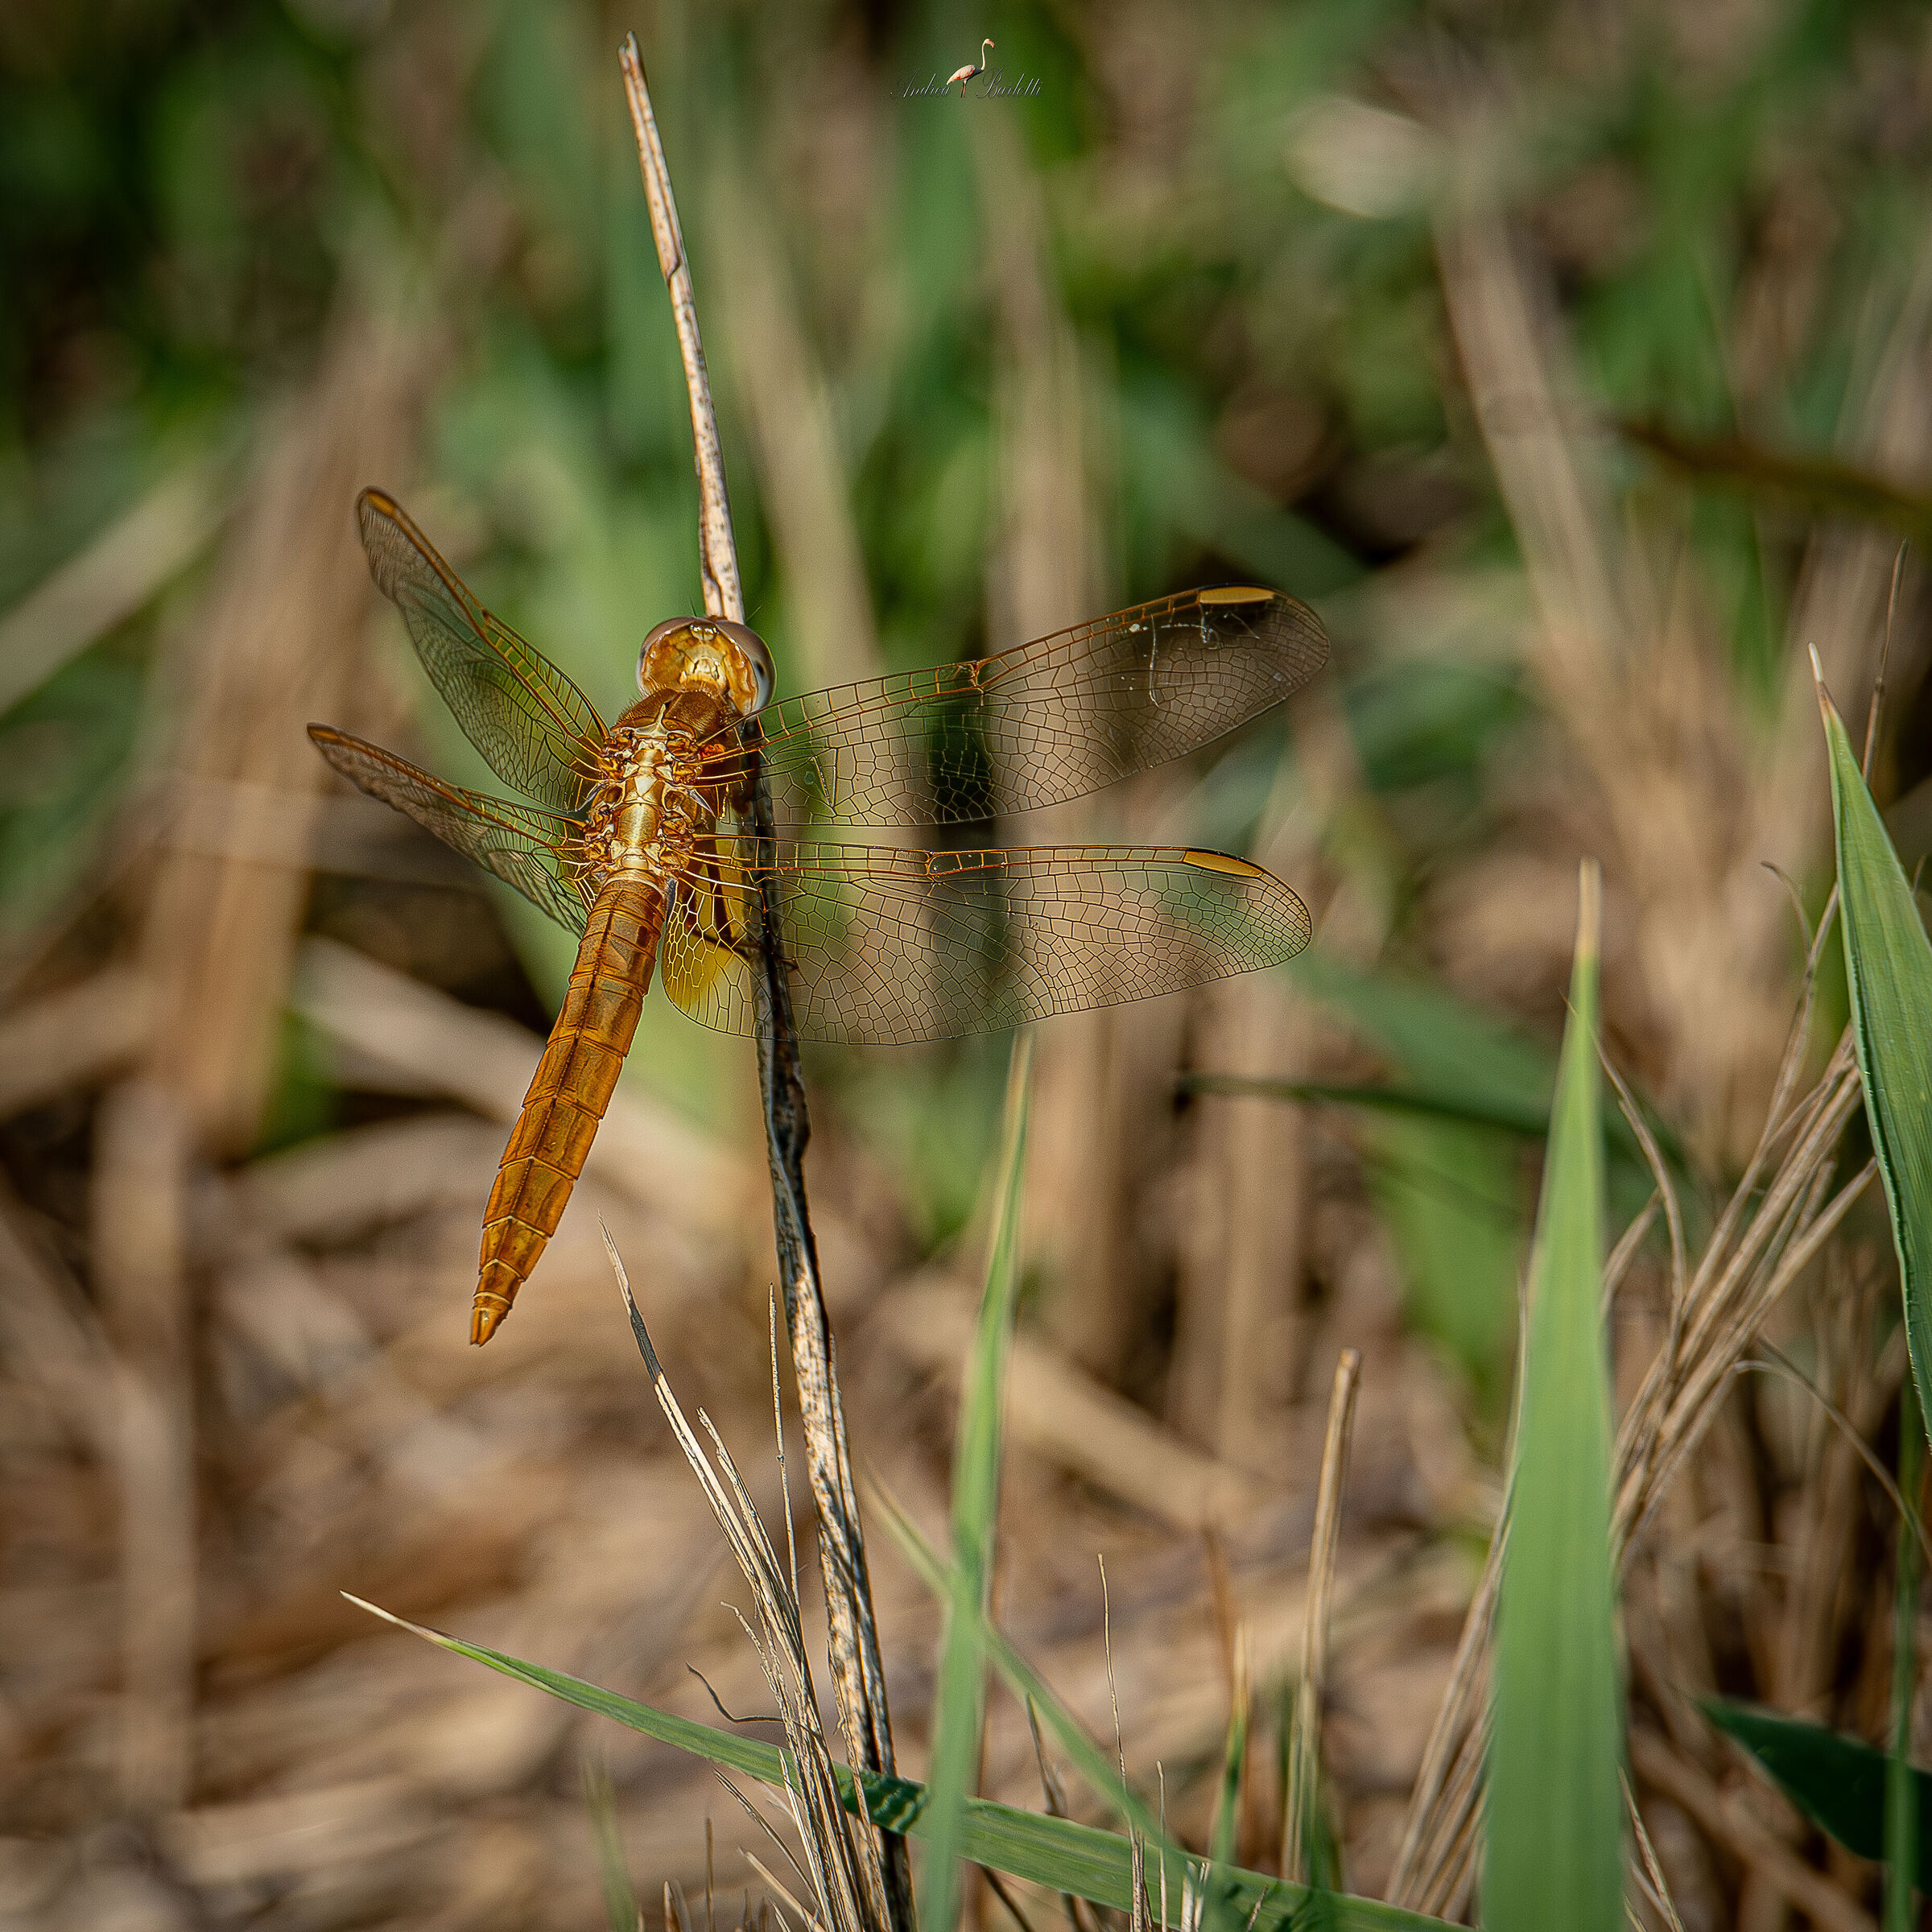 The golden dragonfly...